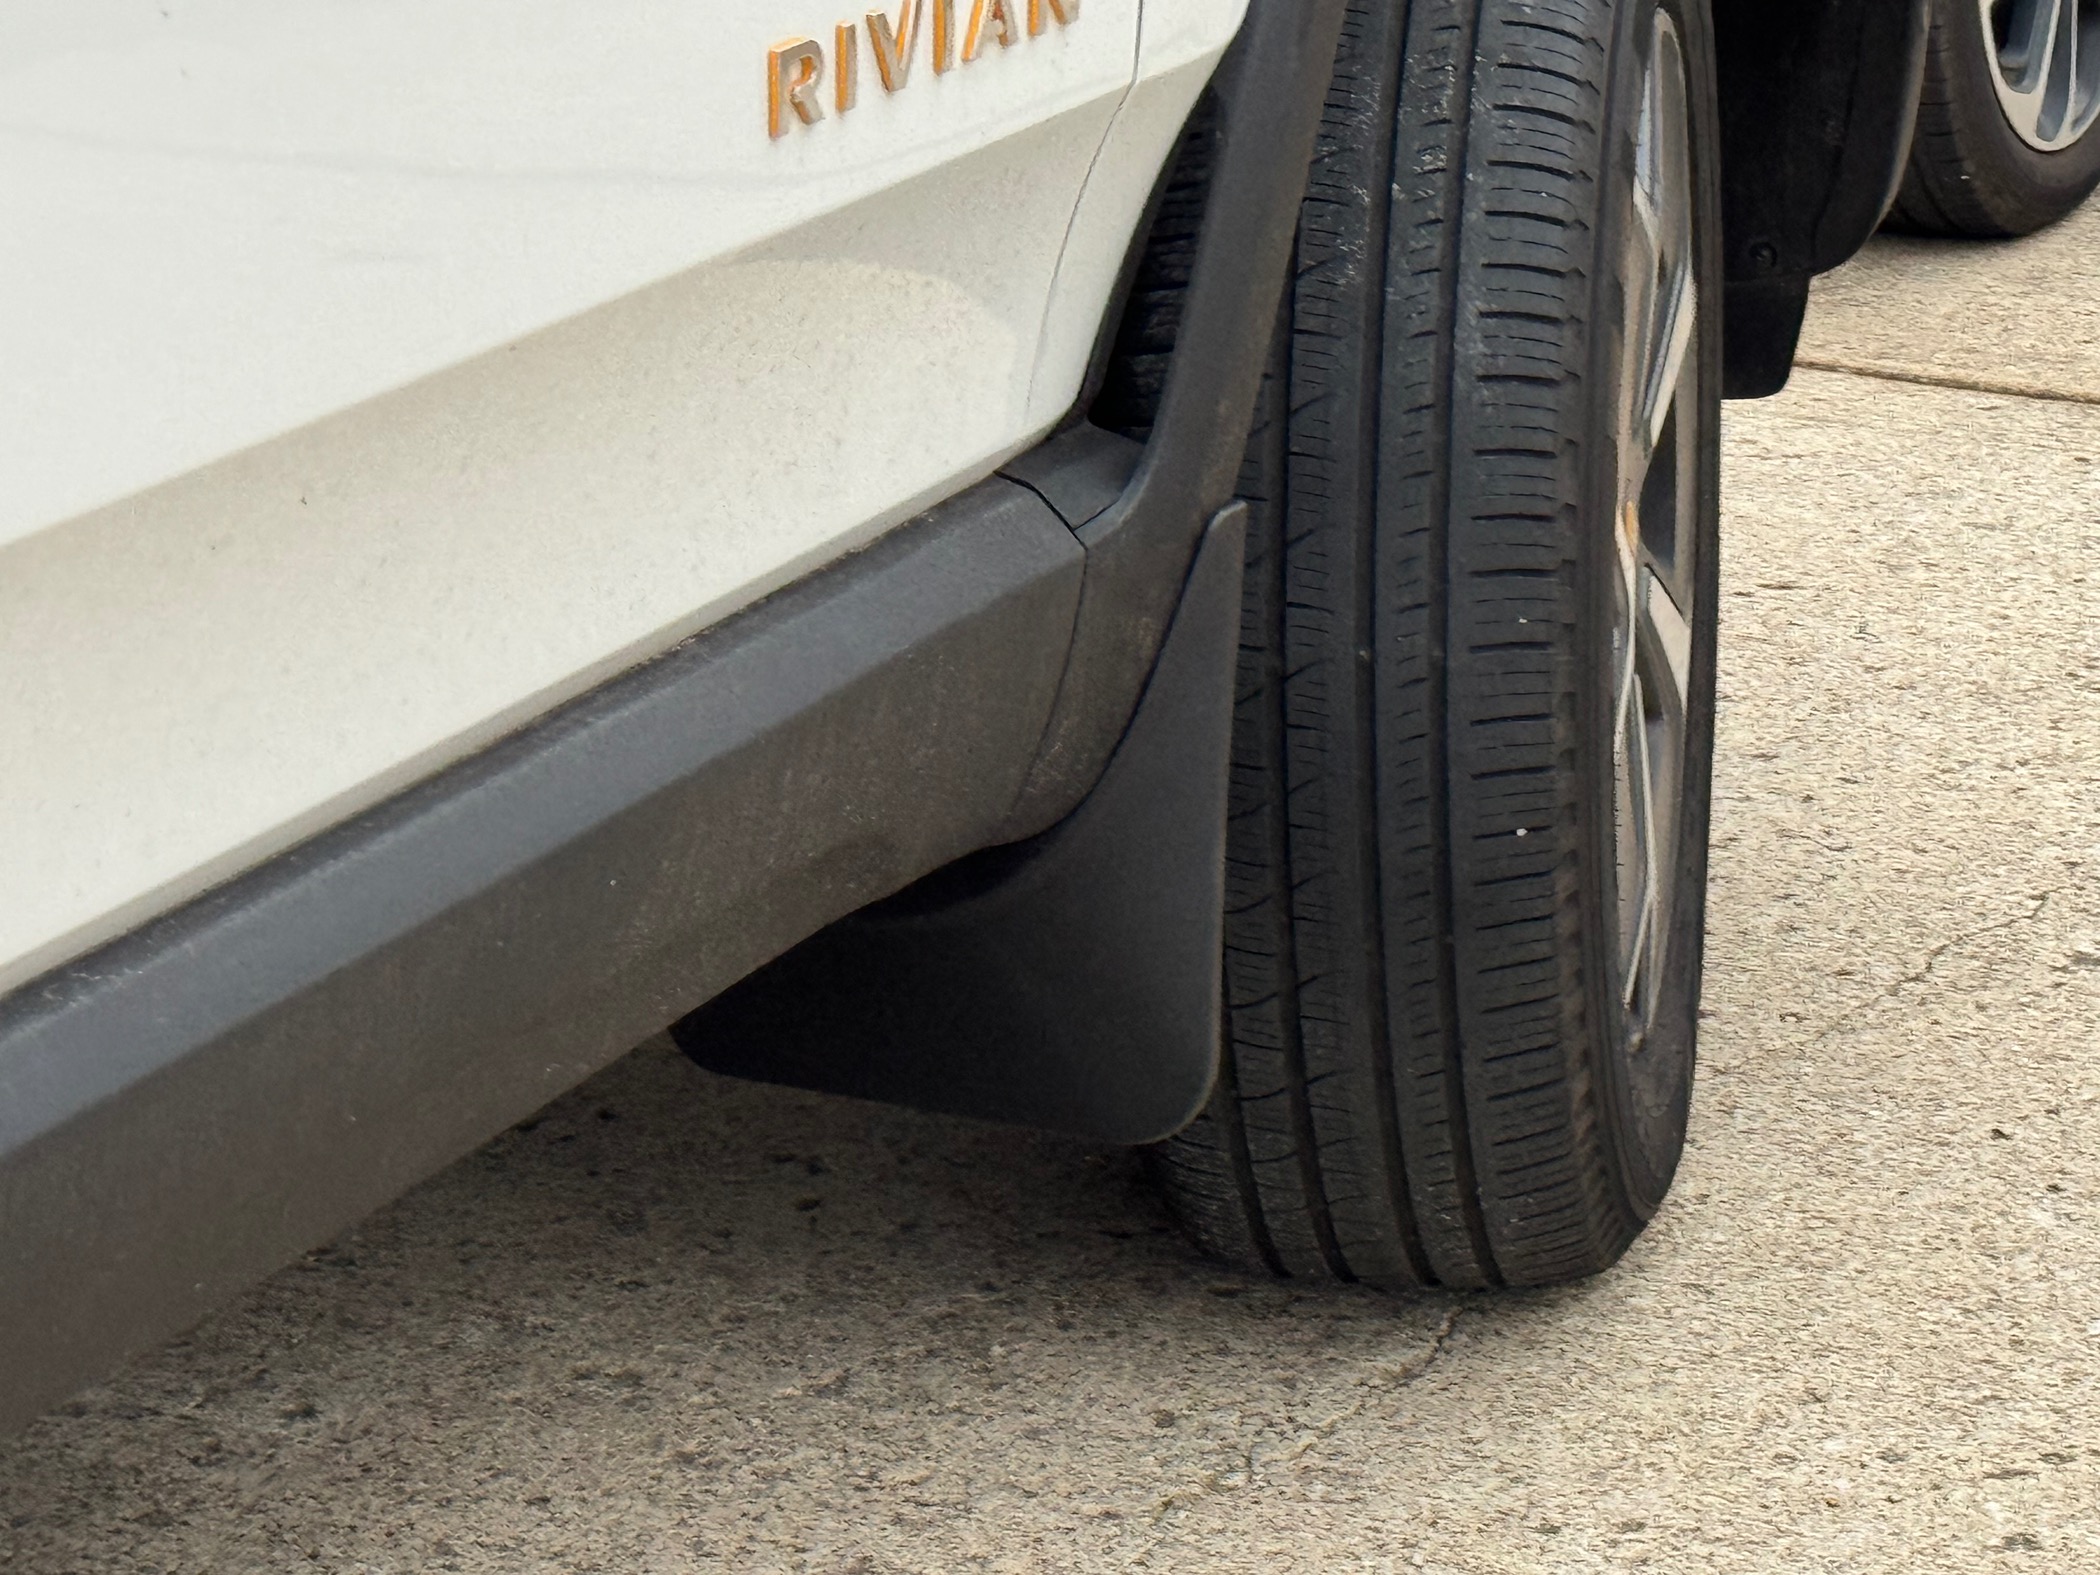 Rivian R1T R1S BestEvMod Mud Flaps for R1T Available Now IMG_3392